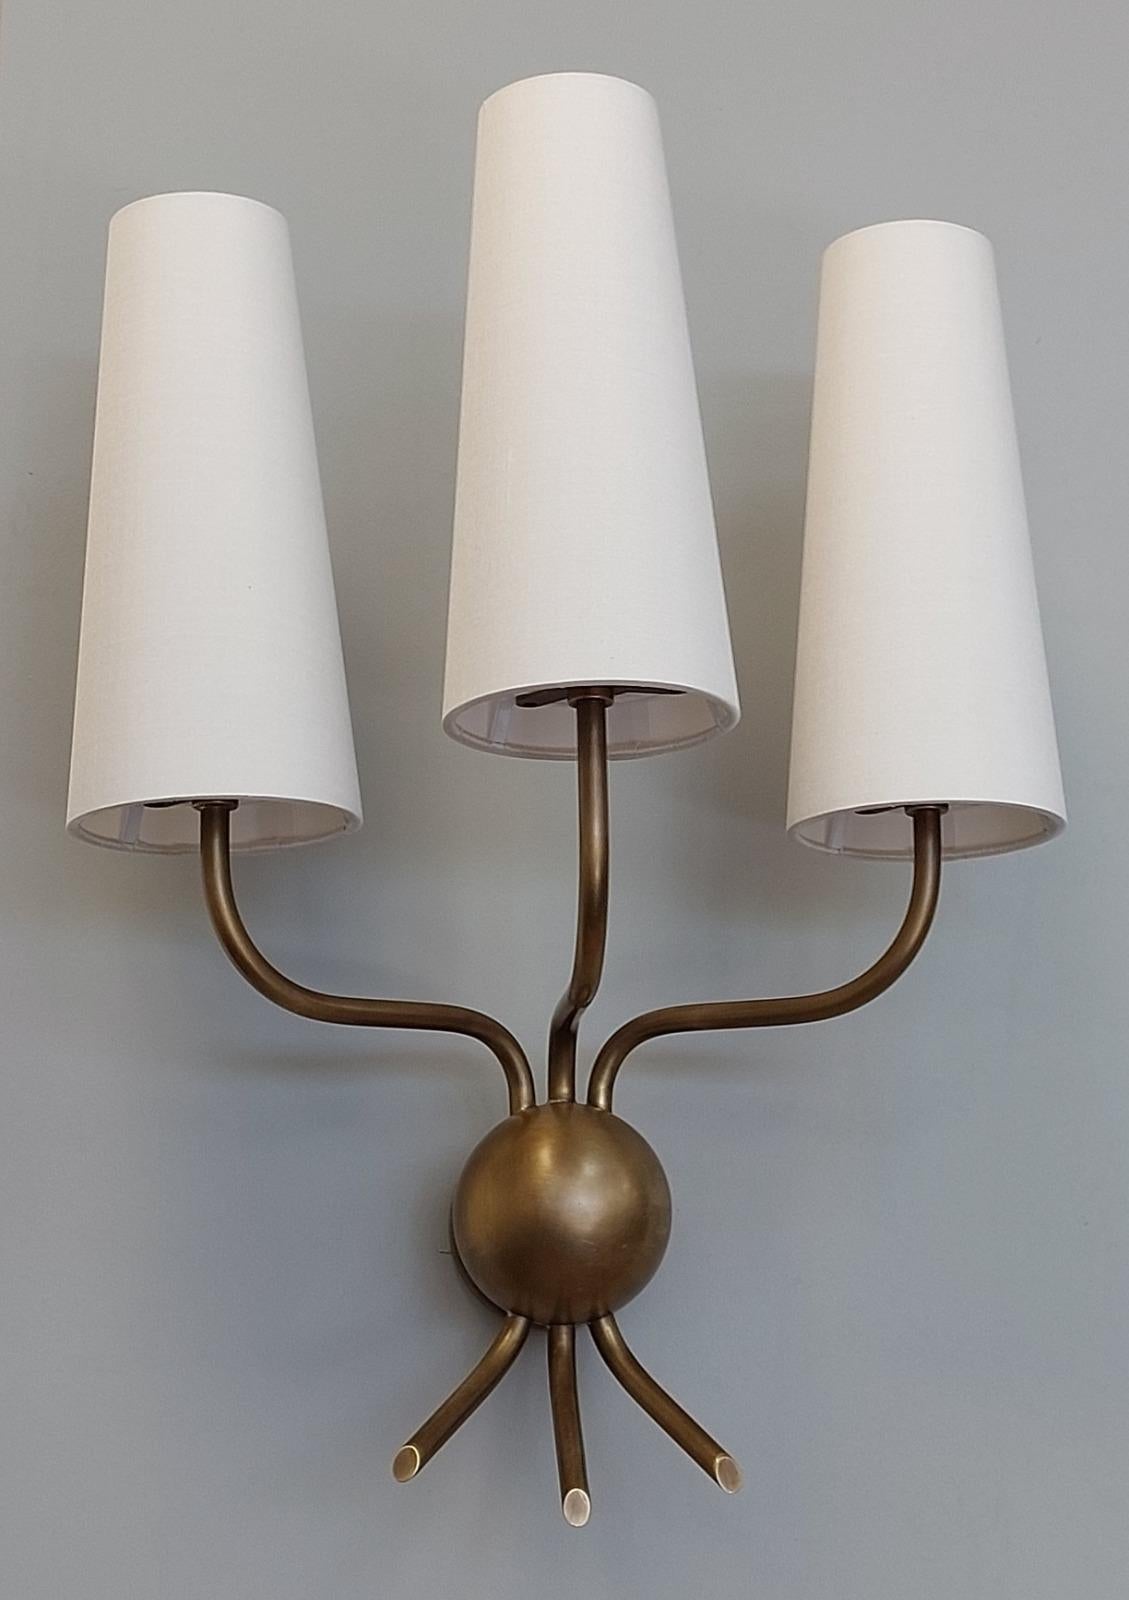 Bespoke three-light sconce, finished in a stunning waxed bronze, this wall sconce is expertly crafted by some of the finest artisans of Europe.
Overall height: 475mm
Shade Height: 220mm
Overall projection: 160mm
Overall Width: 360mm
3 x E14 candle